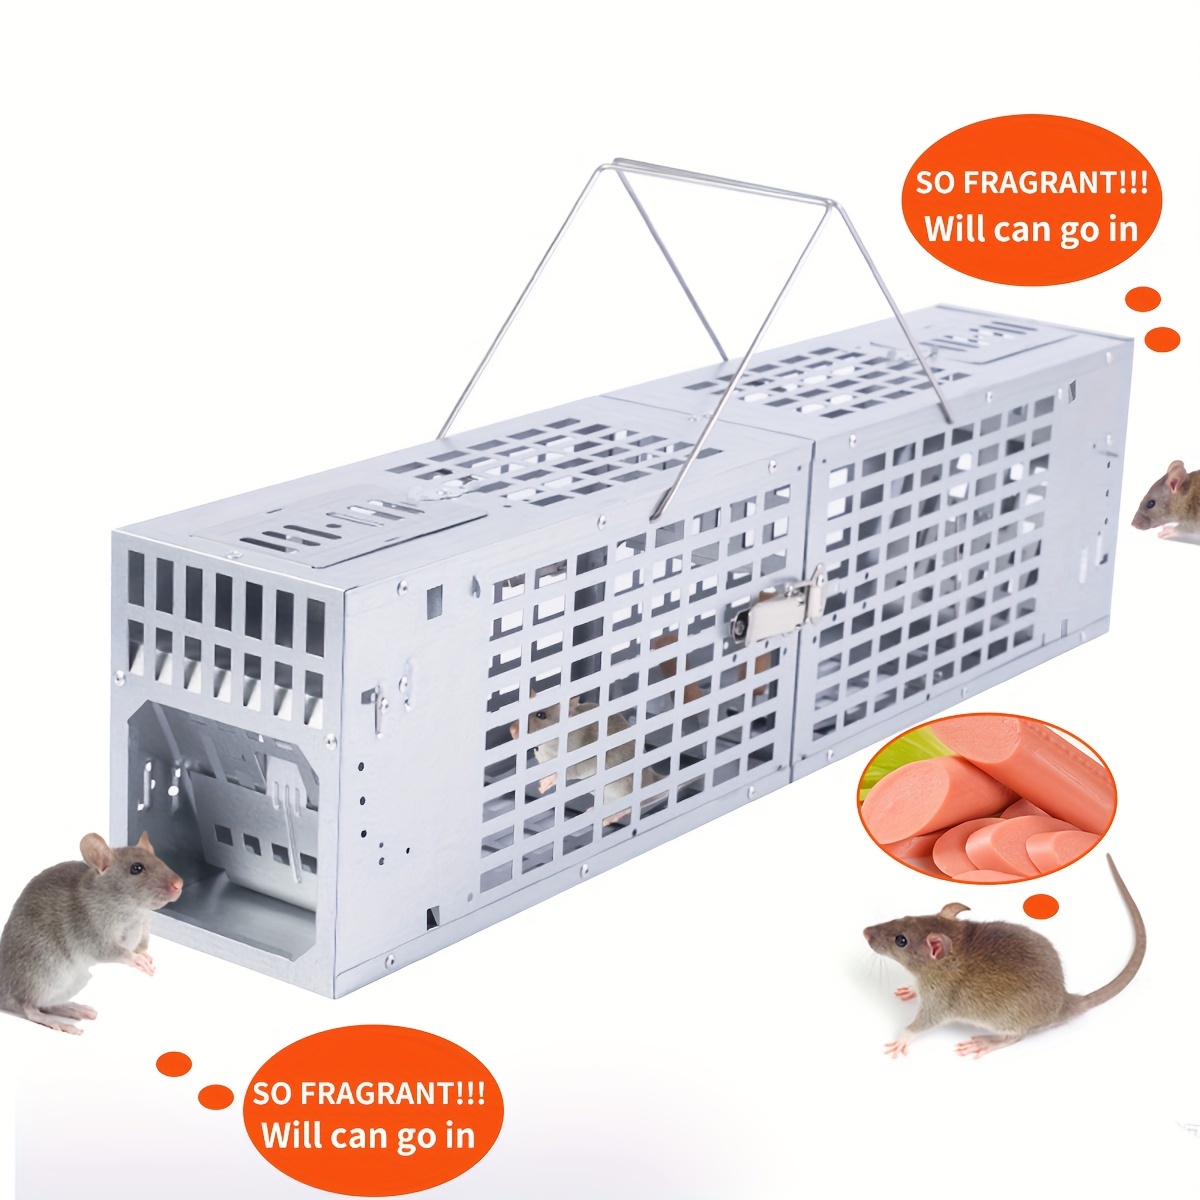 Bait Cage - Secures Bait to the Trap. Kill Rats the First Time!